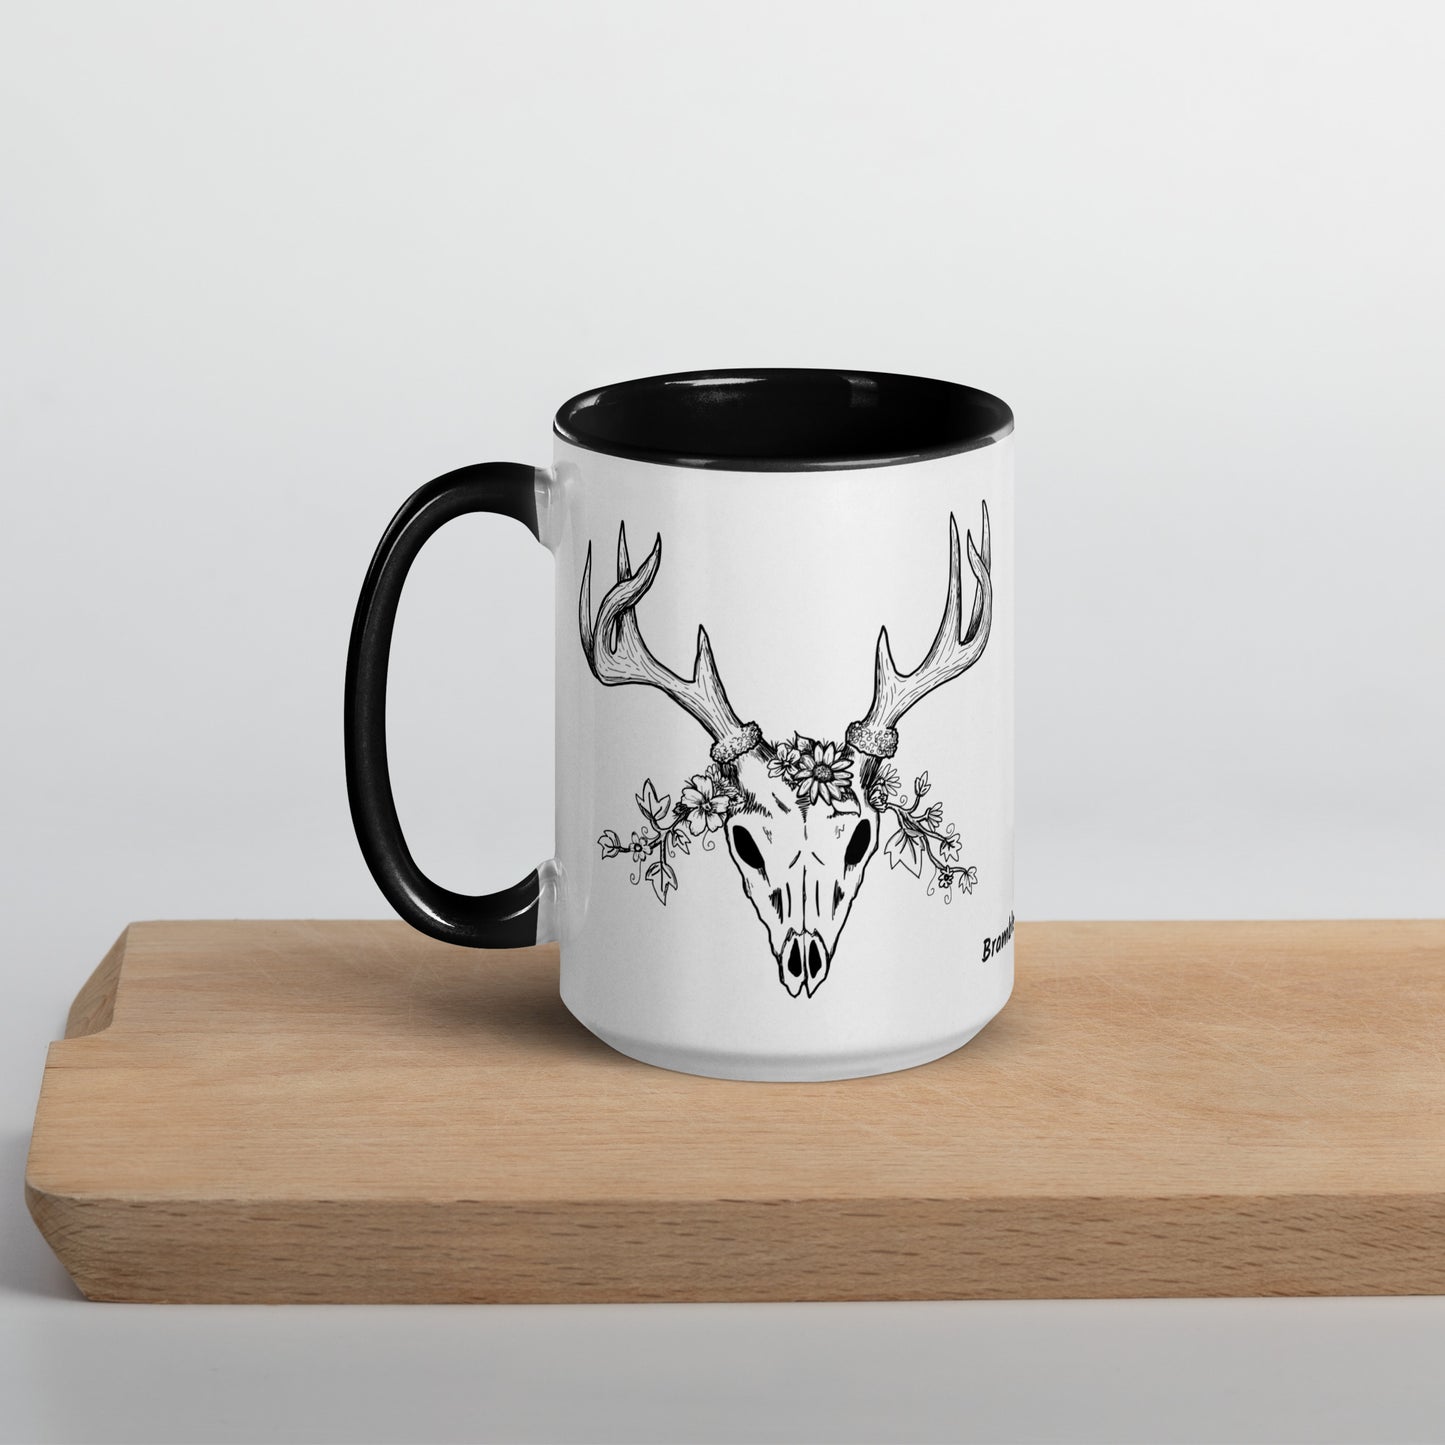 15 ounce ceramic mug with hand illustrated deer skull wreathed in flowers. Double-sided design. Mug has black rim, handle, and inside. Shown sitting on wooden cutting board with handle facing left.